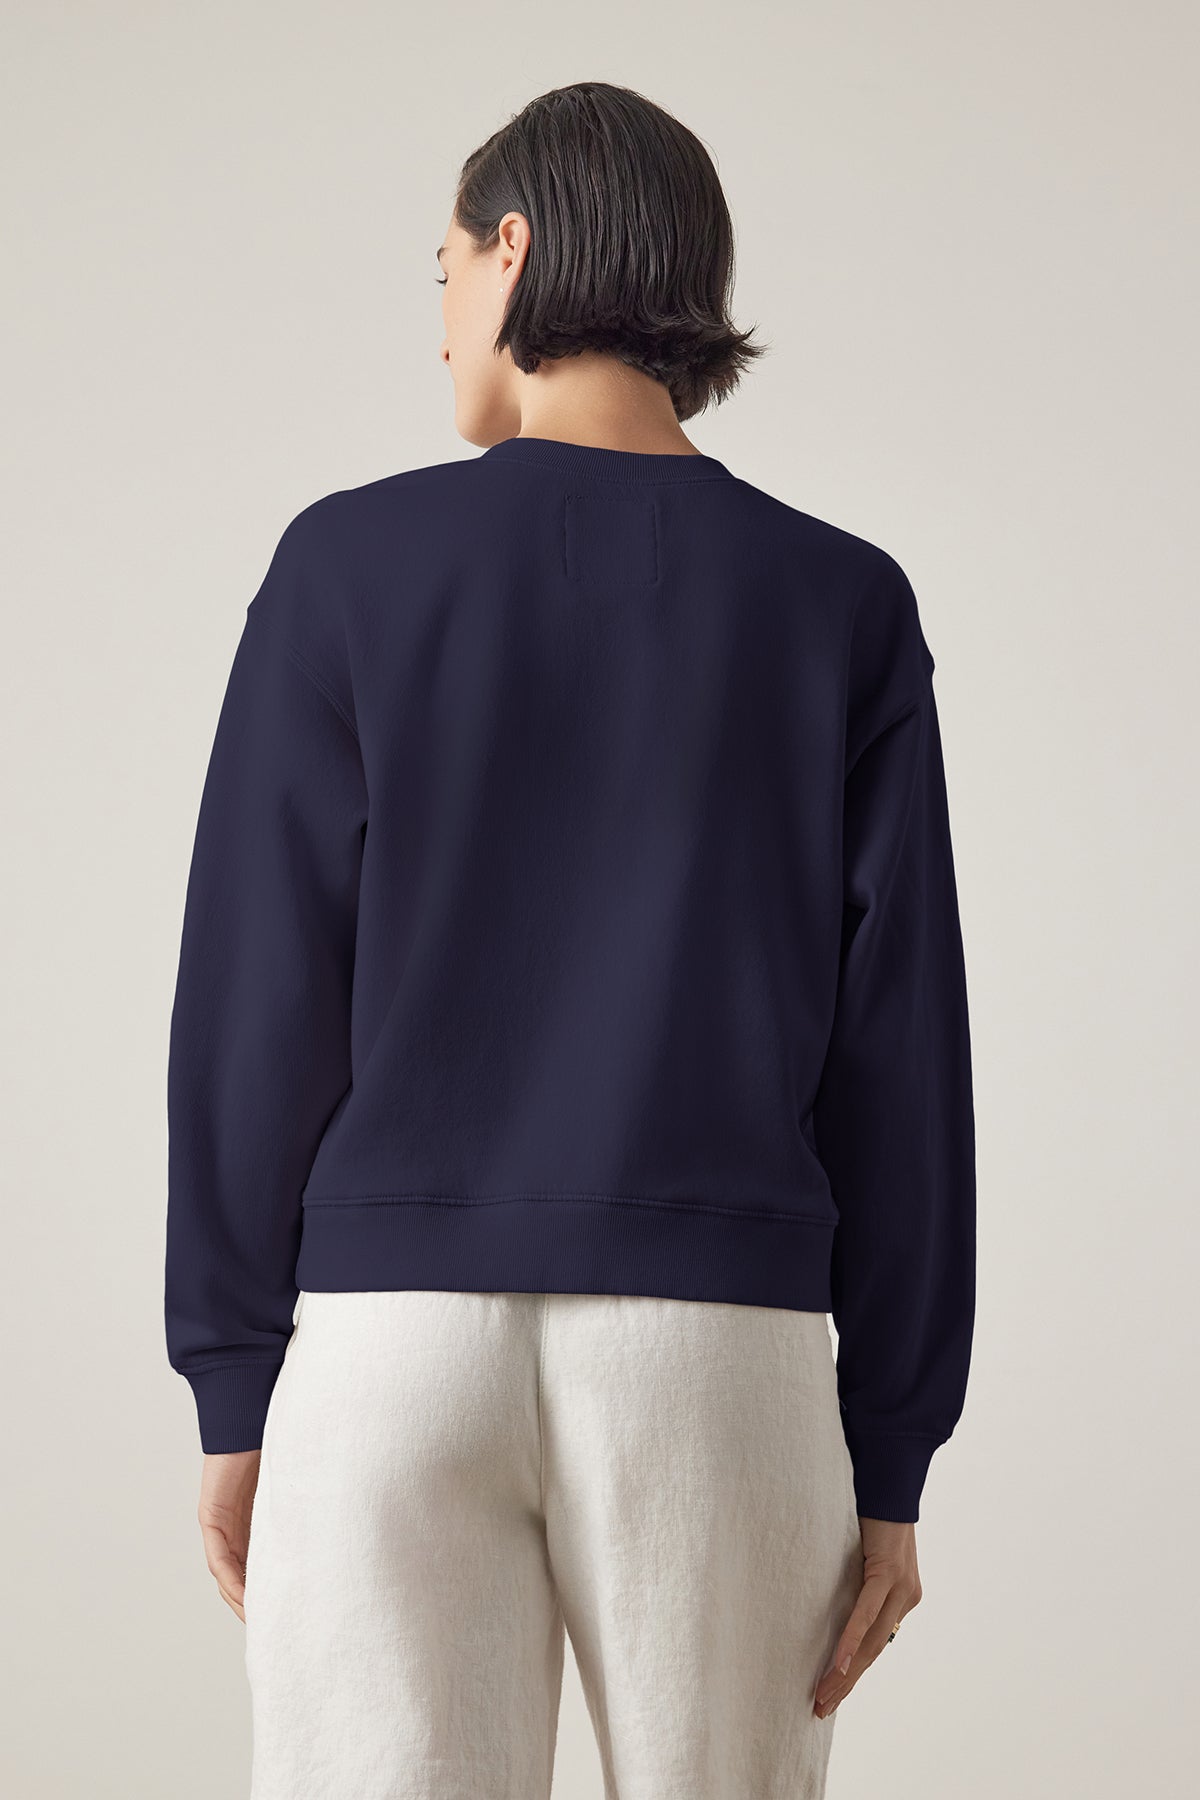   A woman seen from behind wearing a YNEZ SWEATSHIRT made by Velvet by Jenny Graham, made of organic fleece and white pants against a neutral background. 